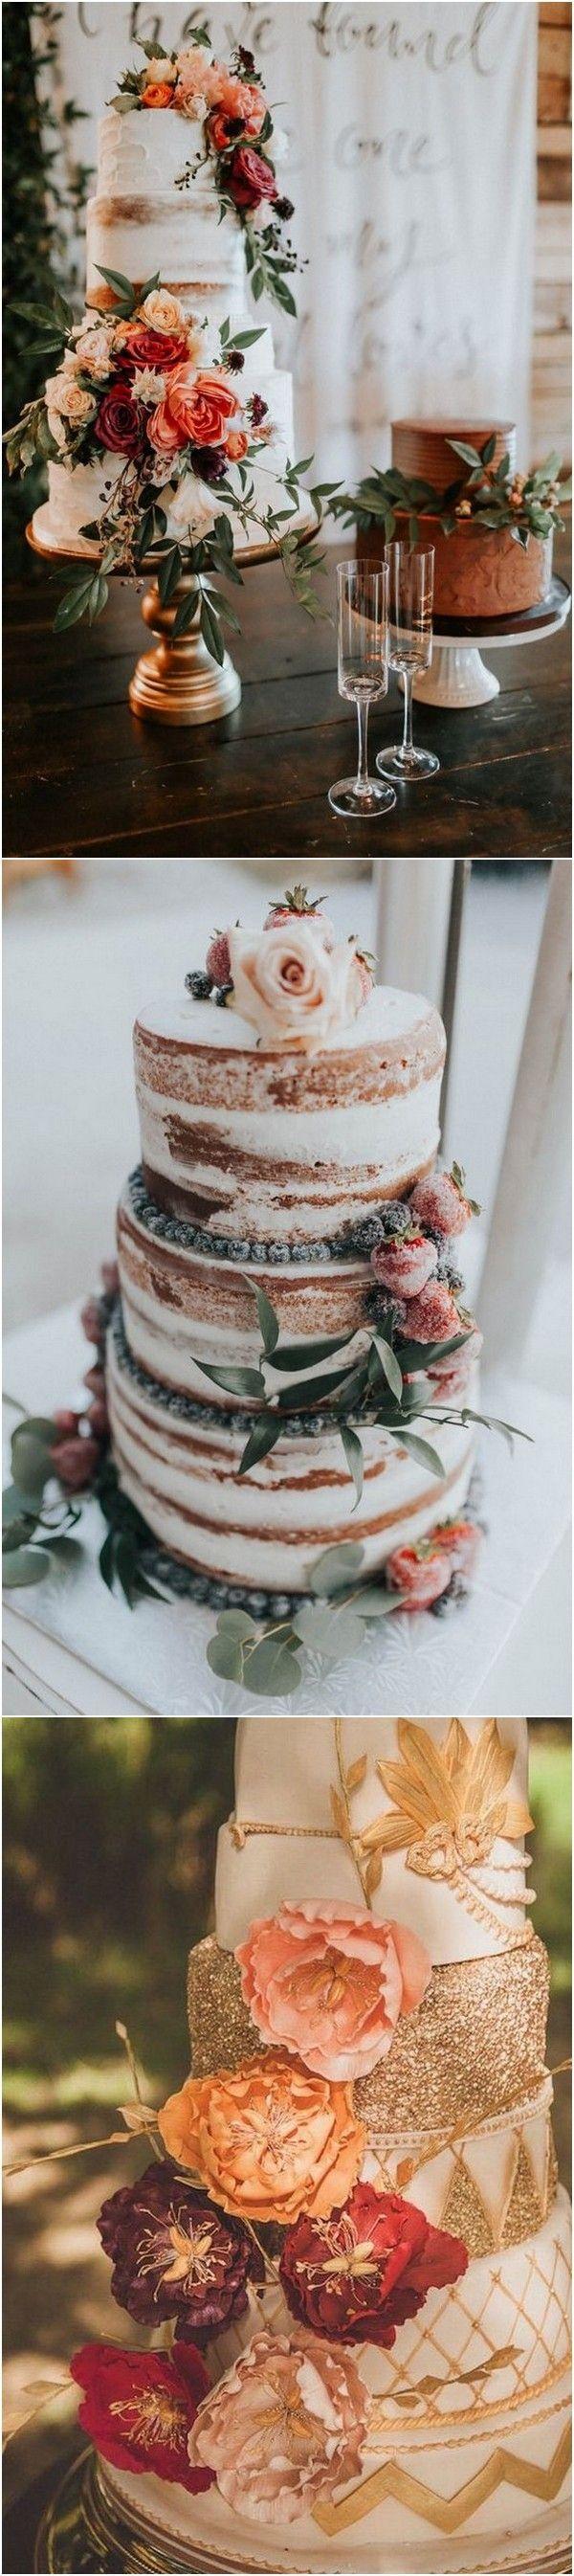 Wedding - Top 20 Gorgeous Wedding Cakes For Fall 2018 - Page 3 Of 3